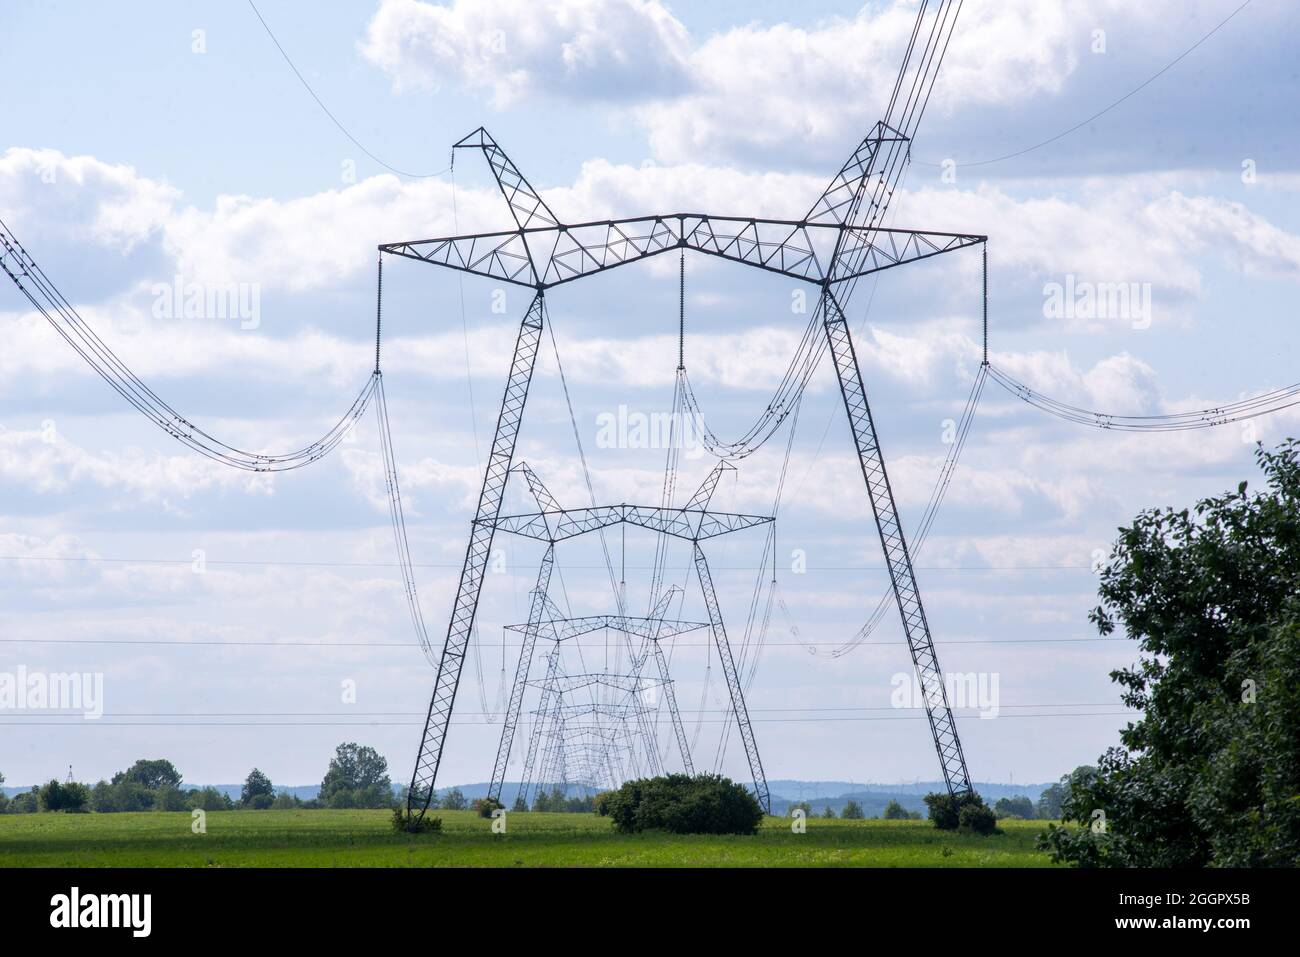 A view of power lines, electric power transmissions in a field in western Ukraine.Prime Minister of Ukraine, Denis Shmygal announced that from October 1st, the cost of electricity for 80% of the population will decrease following the Cabinet of Ministers passing a resolution which reduced the electricity tariff to UAH 1.44 per kilowatt/hour if households consume less than 250 kilowatt/hours per month. At the same time, if the household uses more than this norm, then all consumed electricity must be paid at full price - UAH 1.68 per kWh. (Photo by Mykola Tys/SOPA Images/Sipa USA) Stock Photo